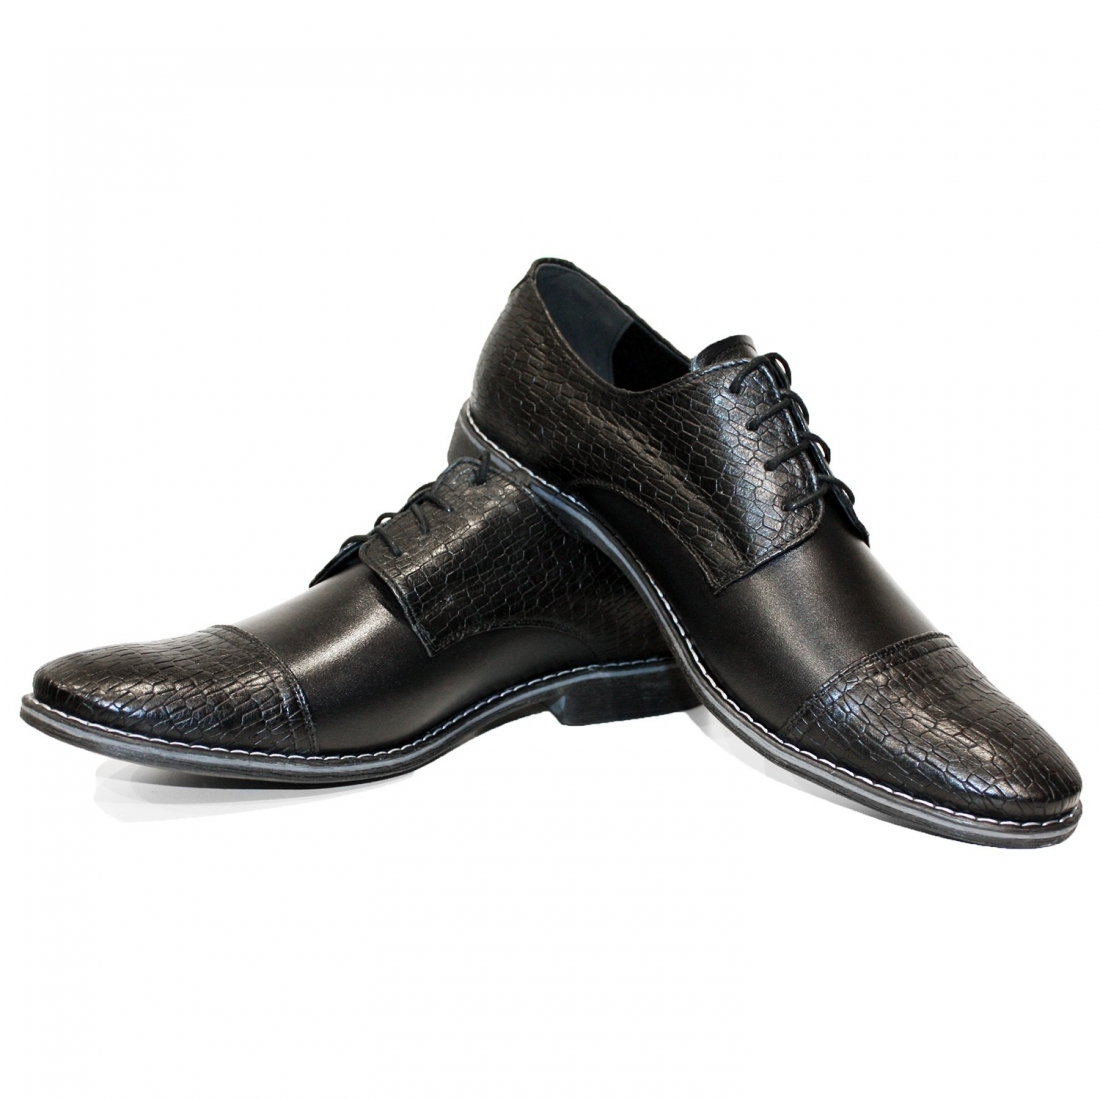 Modello Partyso - Classic Shoes - Handmade Colorful Italian Leather Shoes